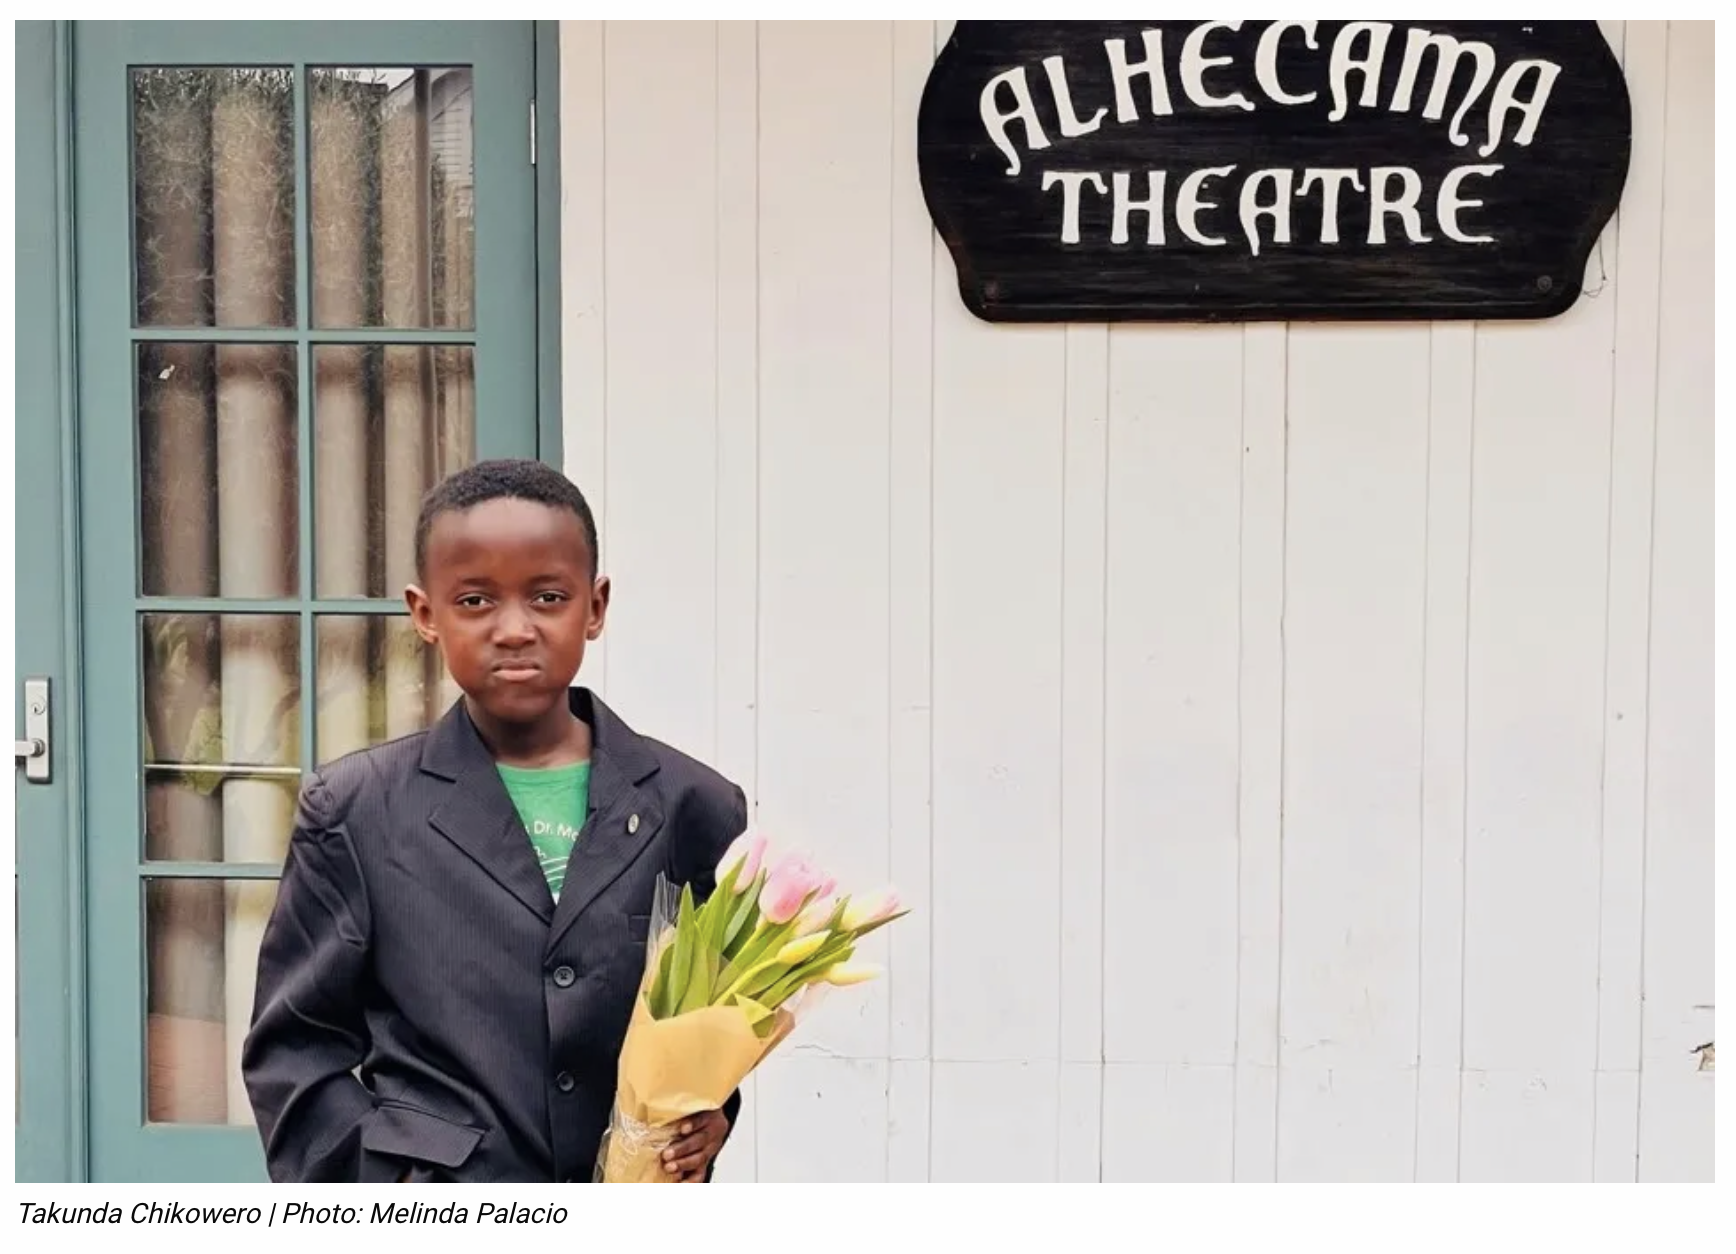 A young Black boy wearing a sport jacket and holding a bouquet of pink tulips stands with one hand in his pocket against the outside of a building next to a black wooden “Alhecama Theatre” sign. He is looking at the camera with a serious and proud expression.